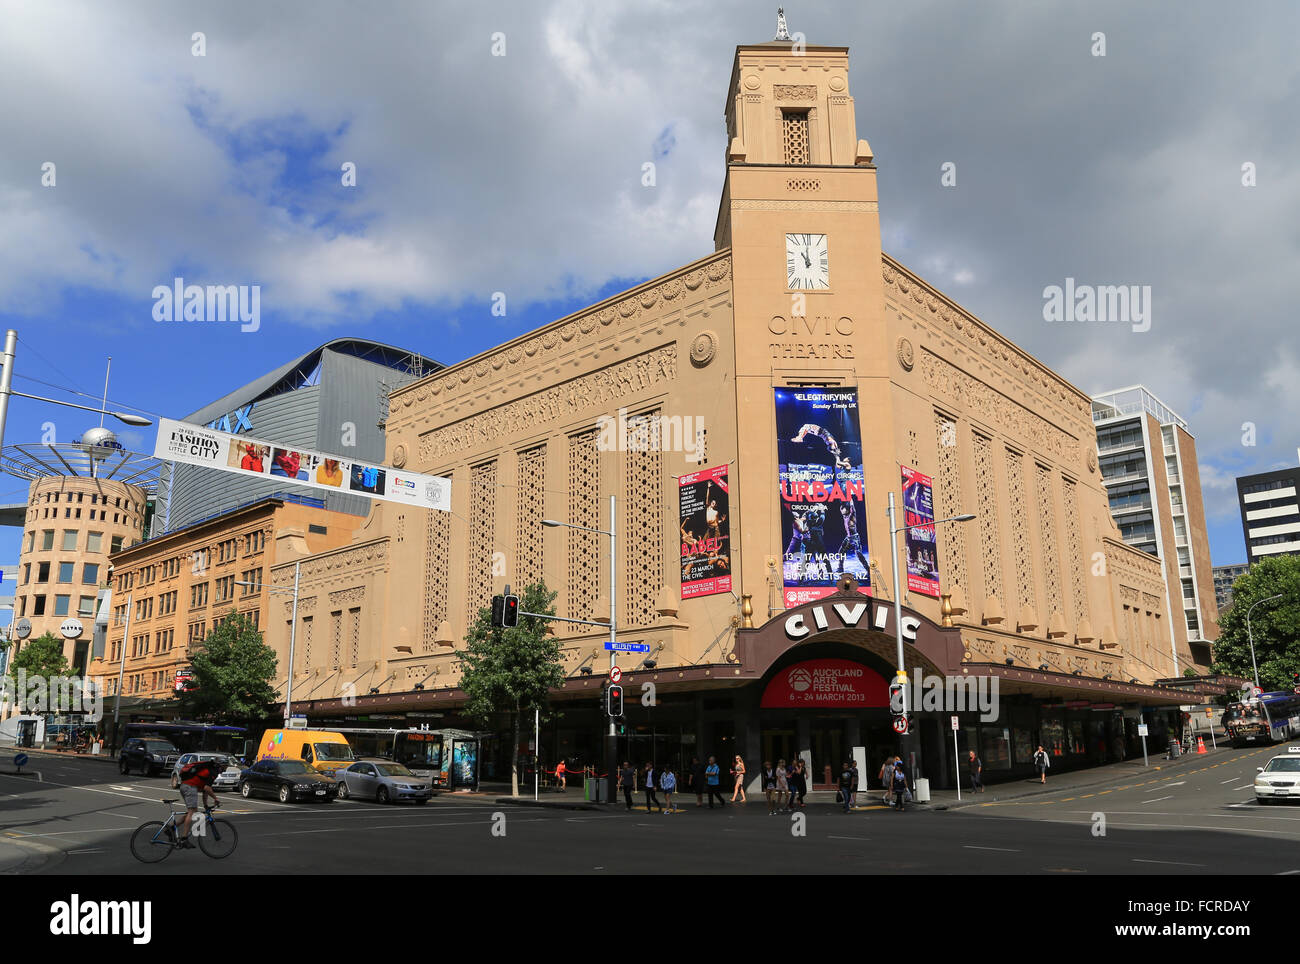 The Civic Theatre at the corner of Queen Street and Wellesley St West, Auckland, New Zealand. Stock Photo